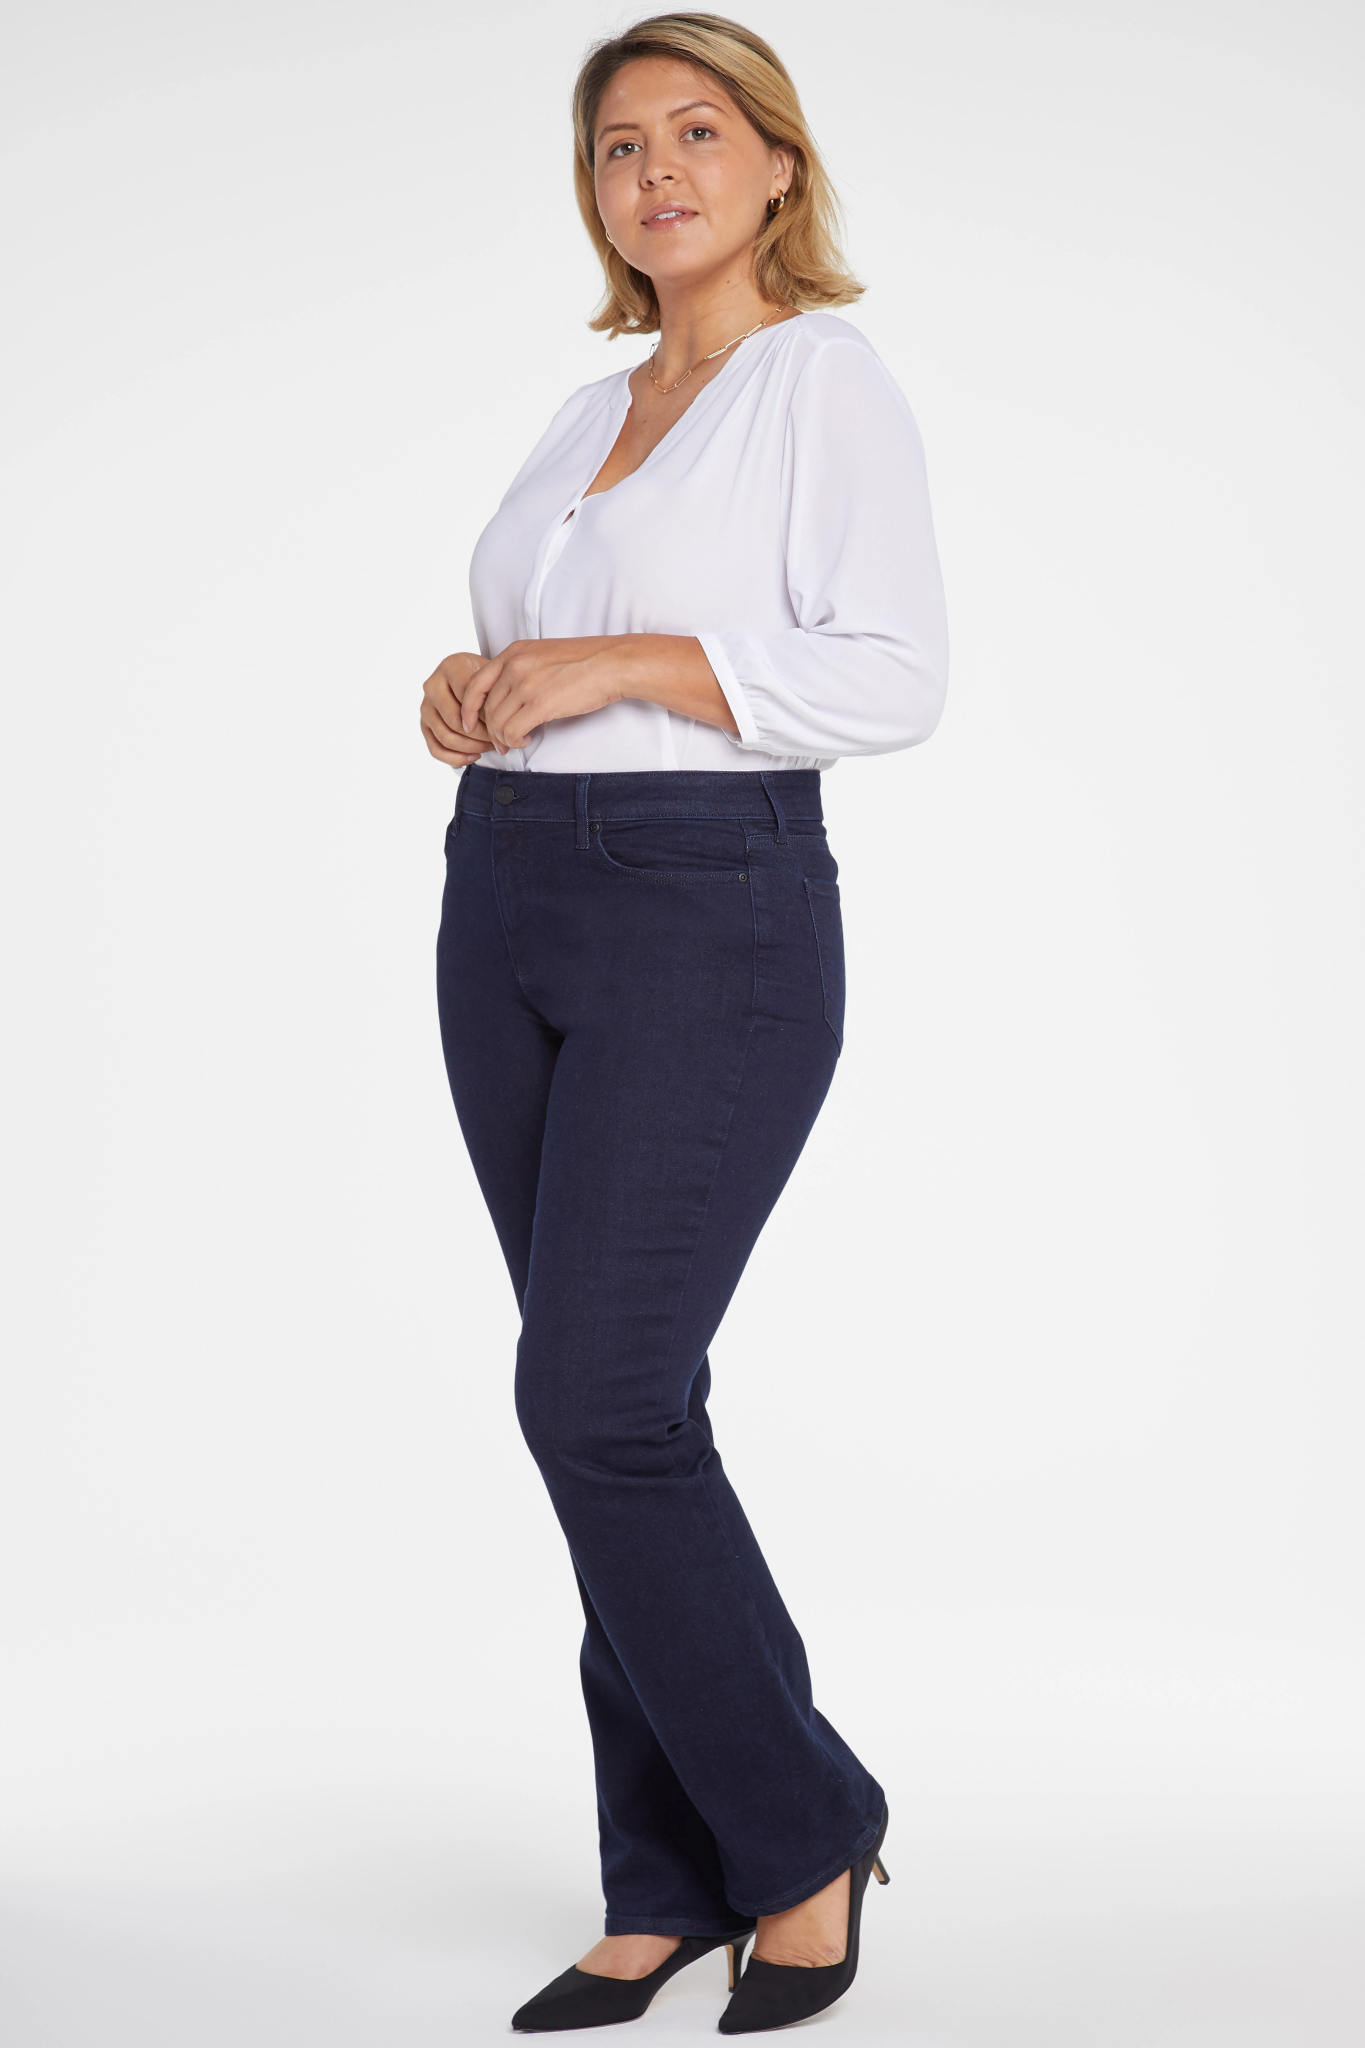 Marilyn Straight Jeans In Plus Size